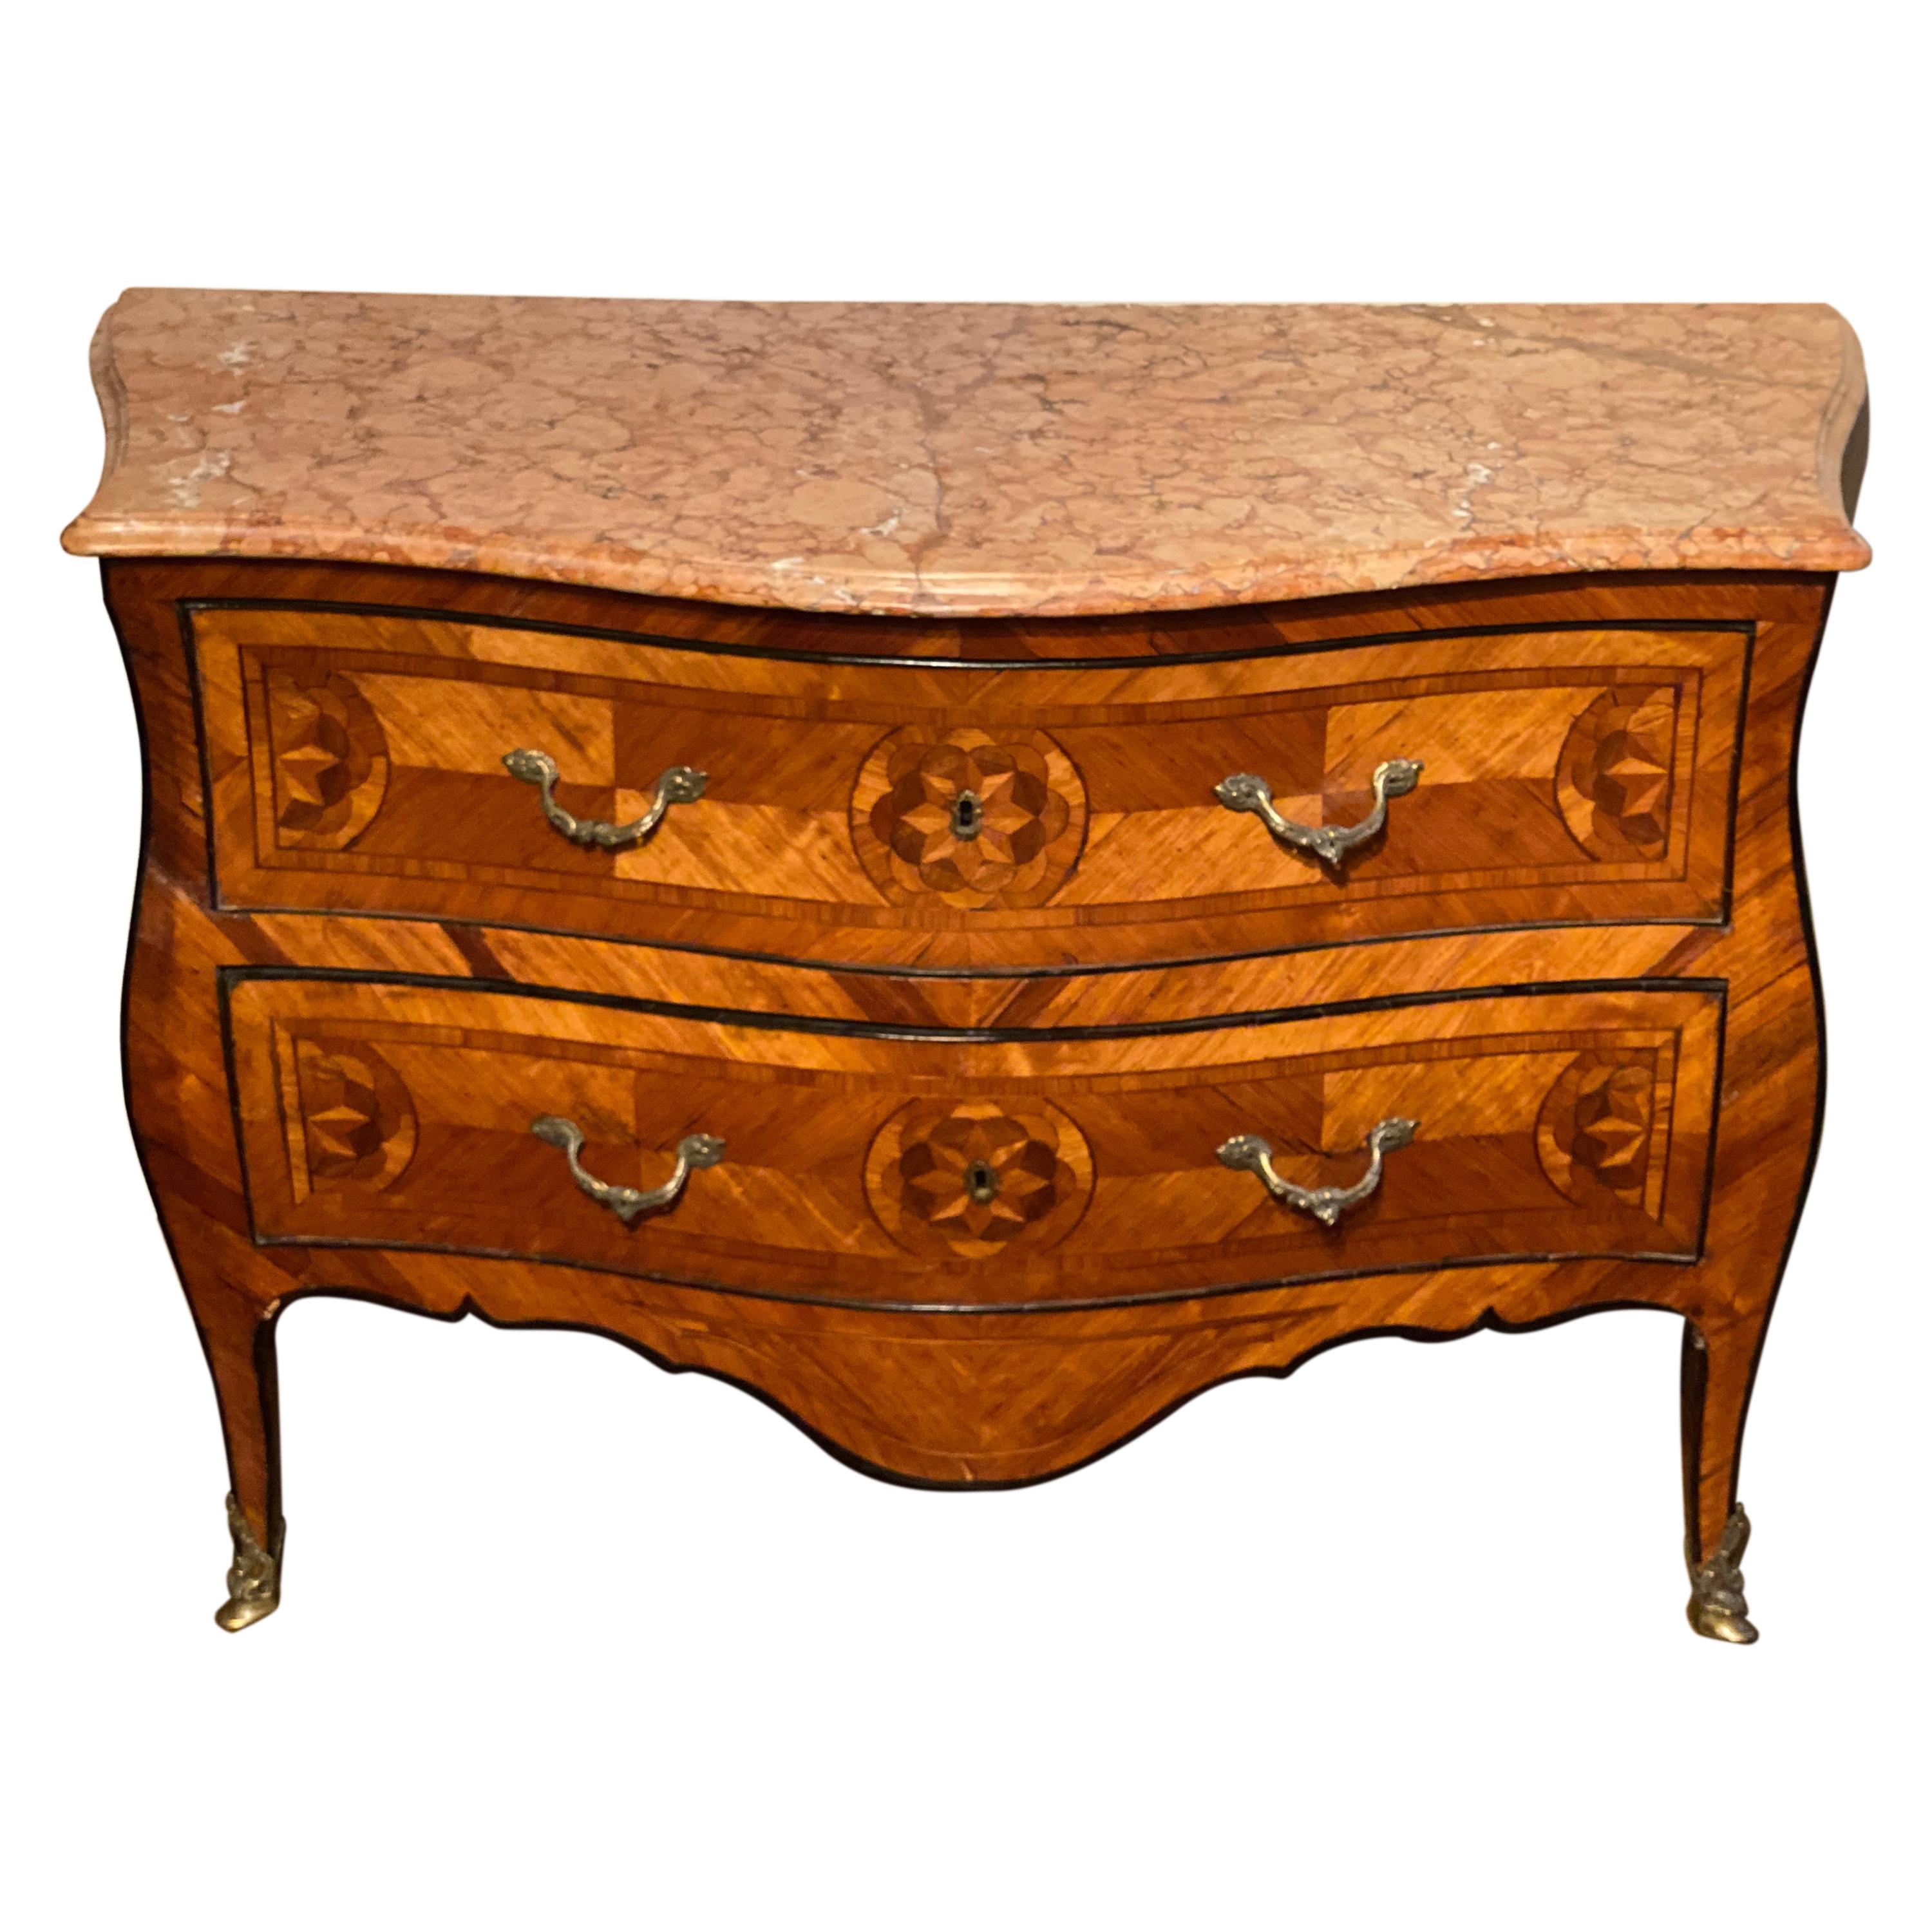 Early 18th Century Bronze Mounted Inlaid Italian Marble Top Commode For Sale